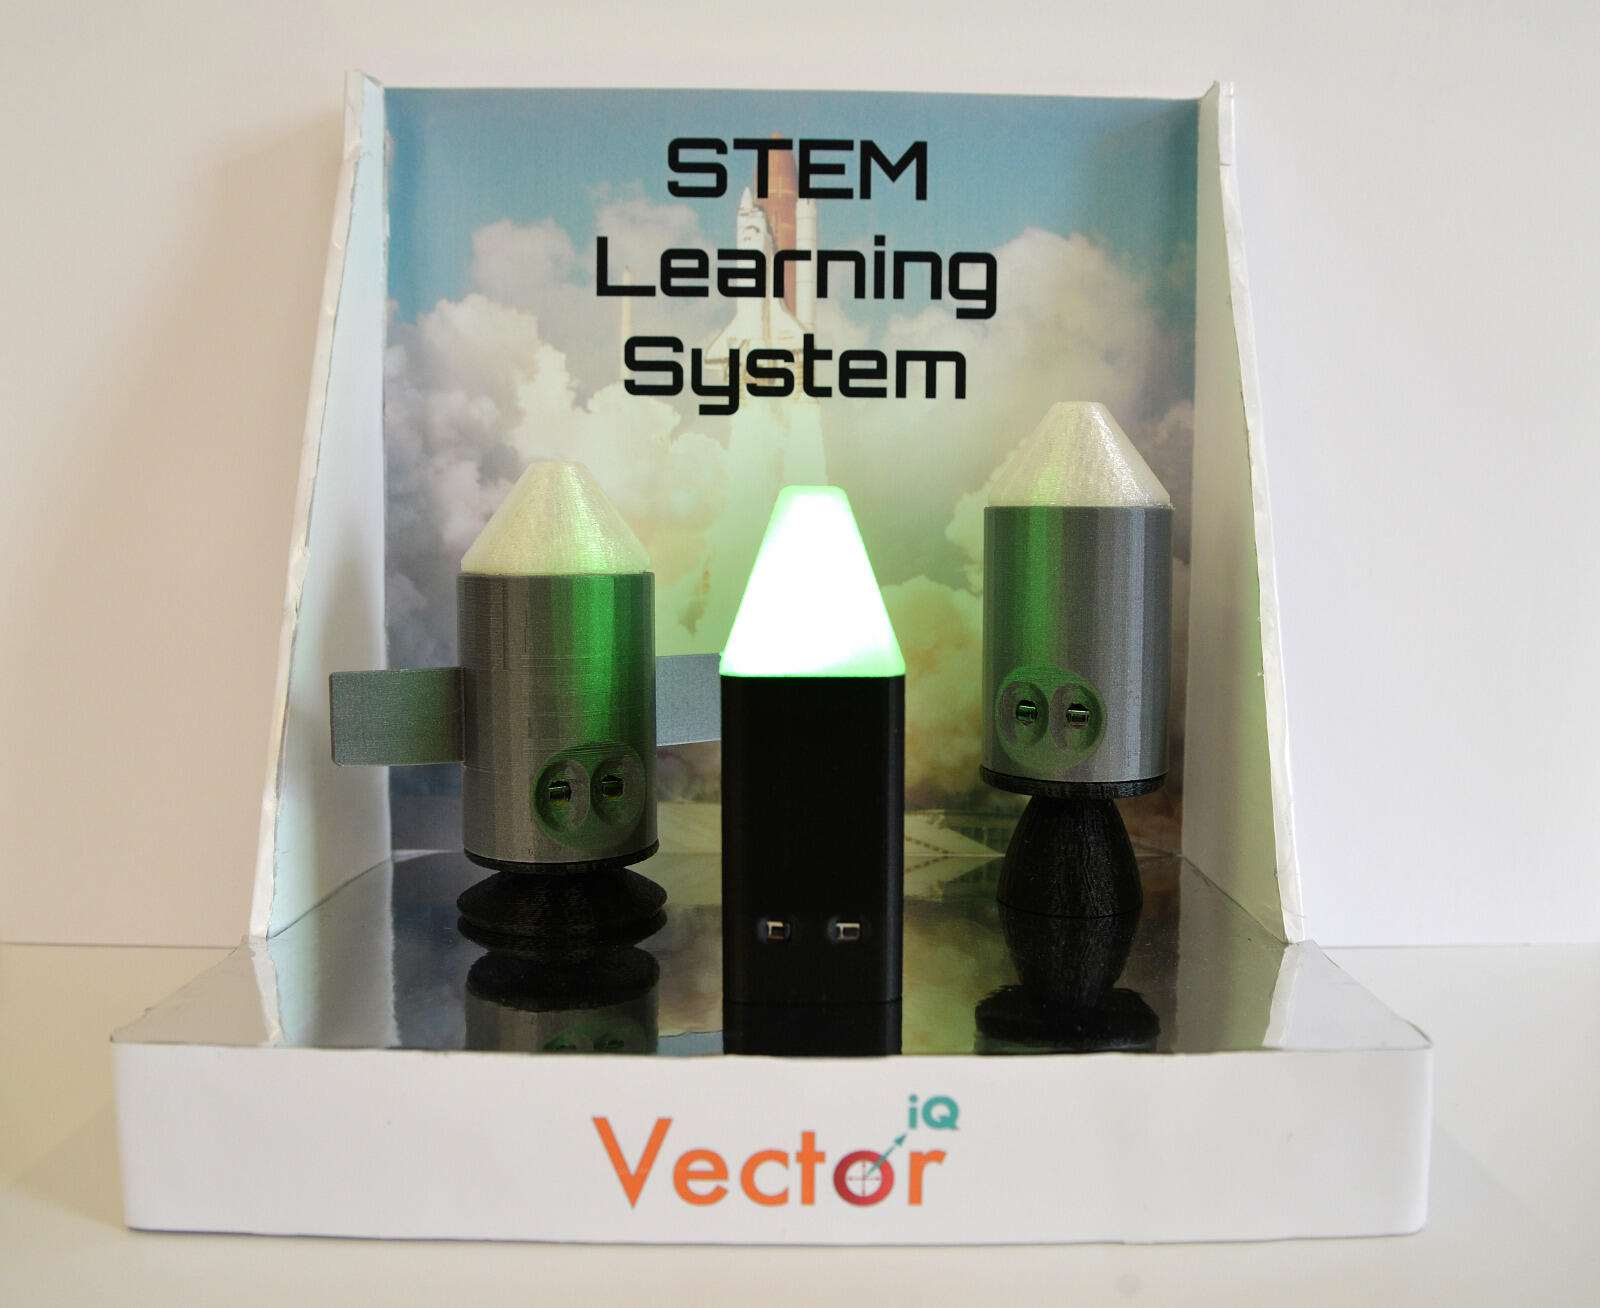 The company’s learning system device, called the Vector iQ Learning System, looks a bit like a series of model rocket ships, each featuring lights and sounds. 